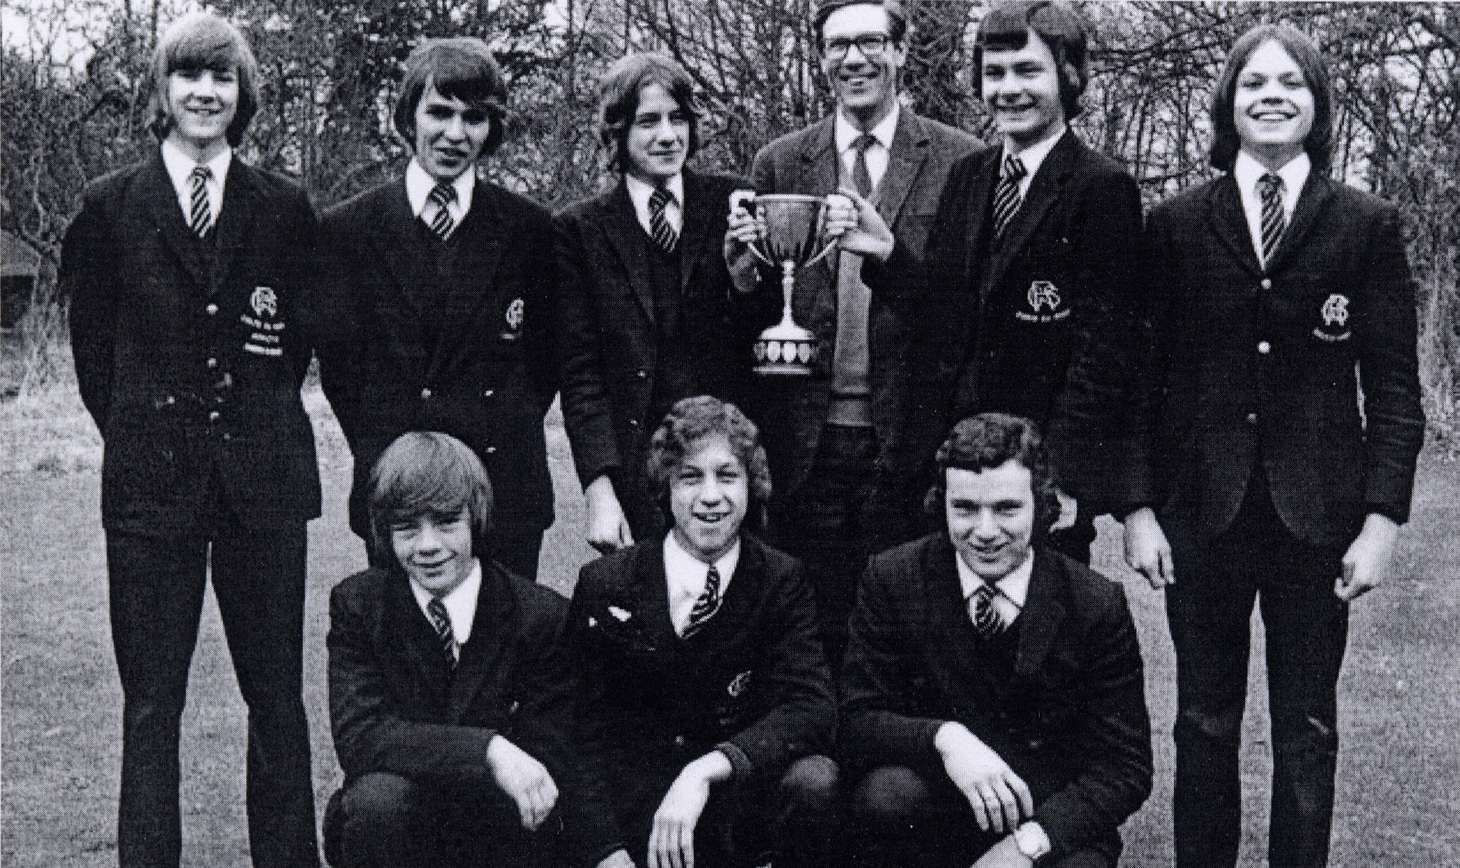 The 1974 RGS Colts team - winners of the Surrey 7s. Where are they now? And do they still have this much hair?!